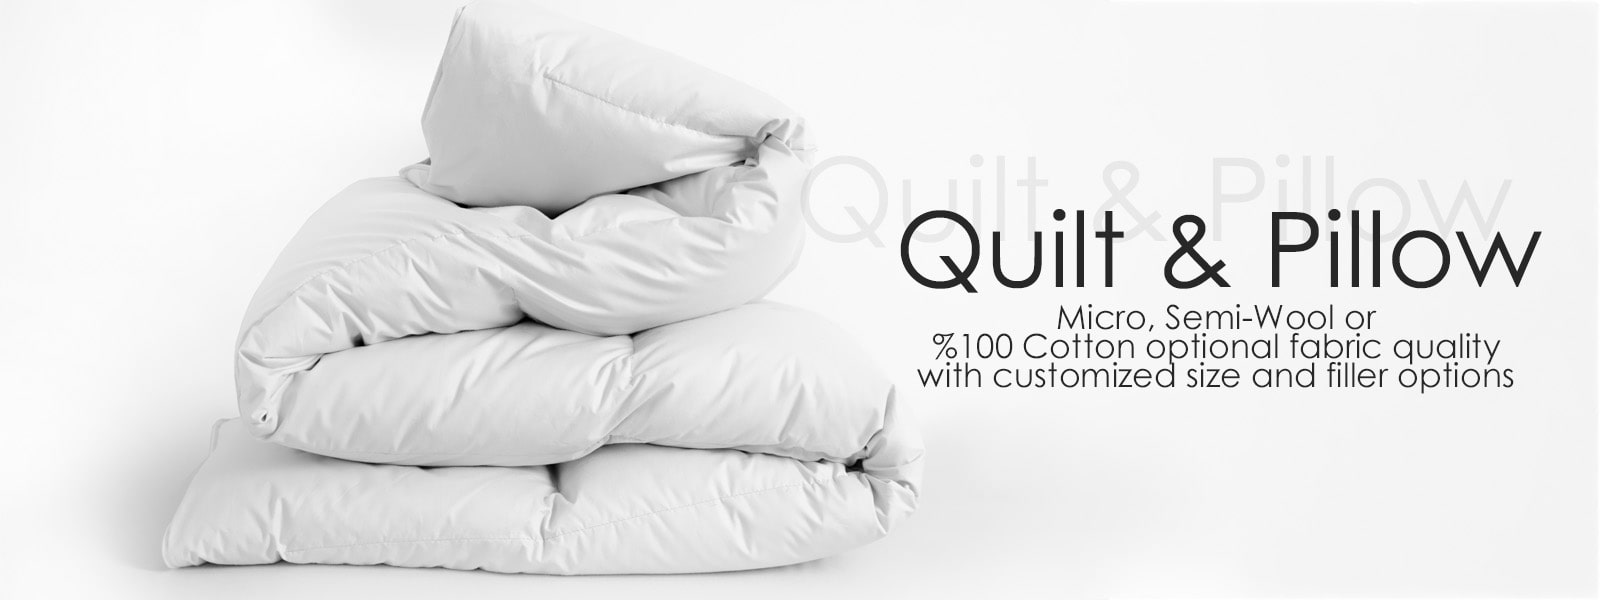 Quilt and Pillow